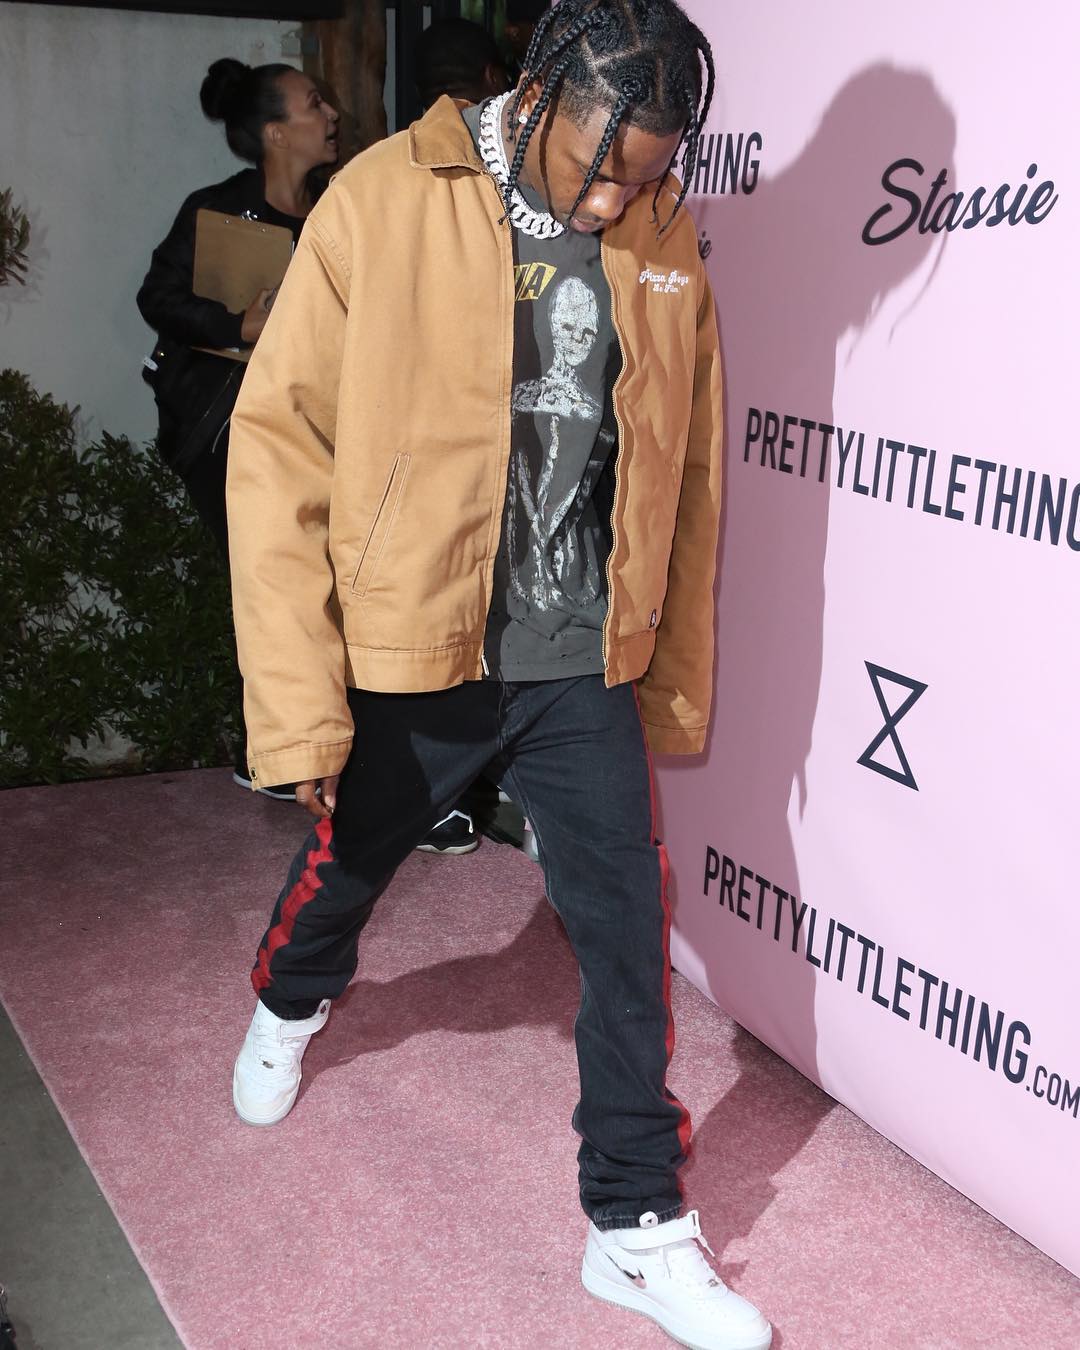 SPOTTED: Travis Scott in Pizza Boys Jacket, Balenciaga Jeans and Nike Sneakers – PAUSE Online | Men's Fashion, Style, Fashion News & Streetwear